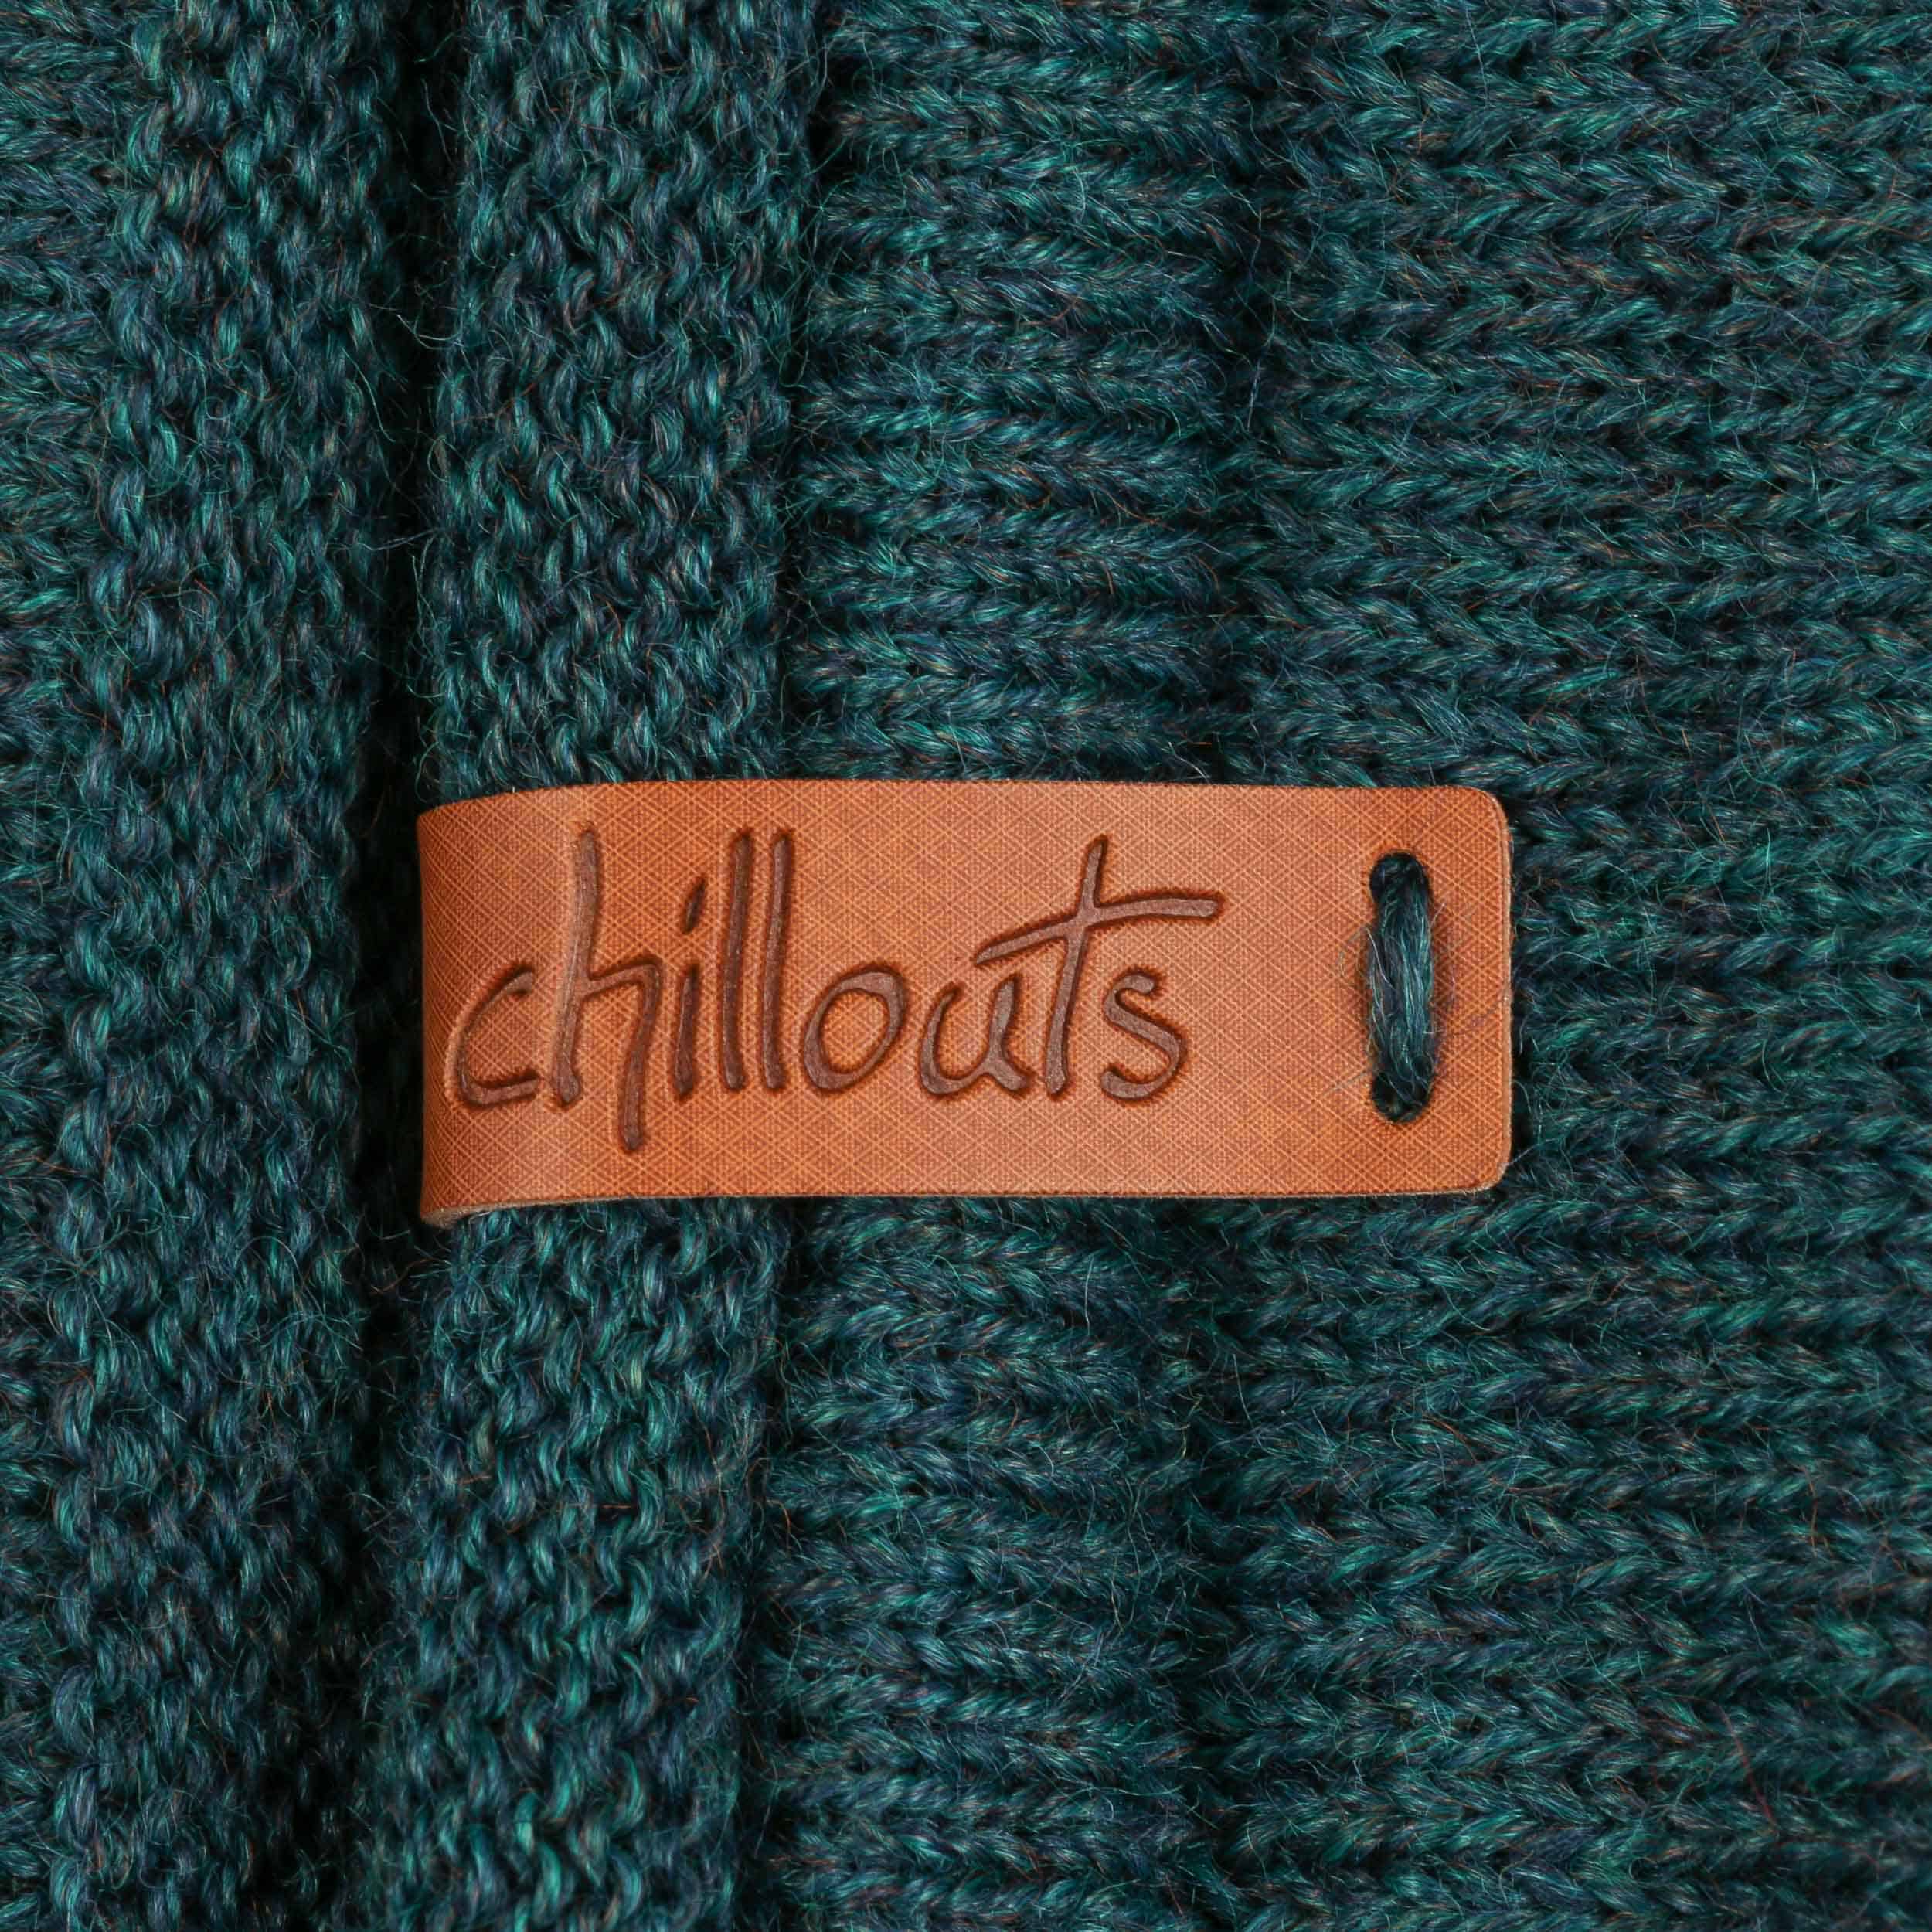 € Oversize Chillouts Beanie 29,95 by Leicester -